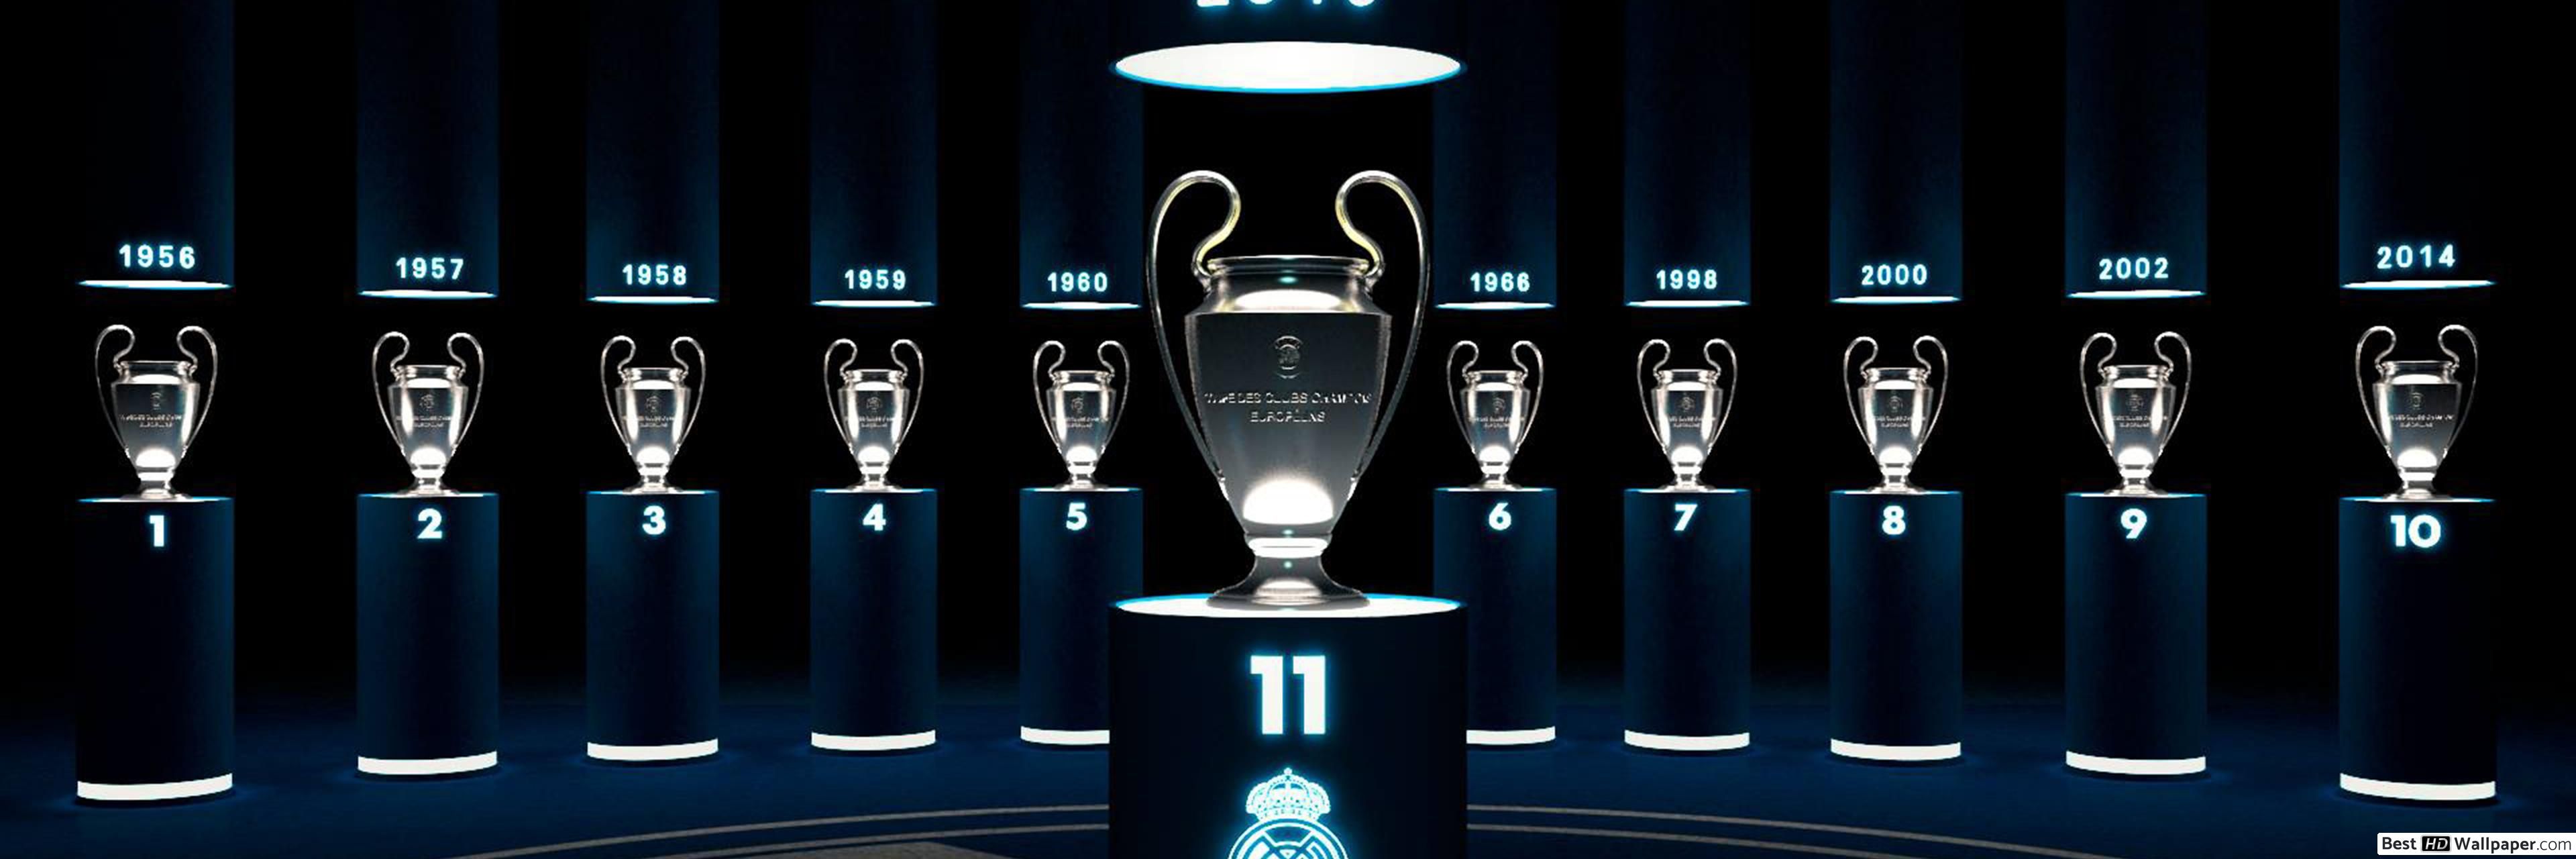 Real Madrid Champions League Wallpapers - Wallpaper Cave